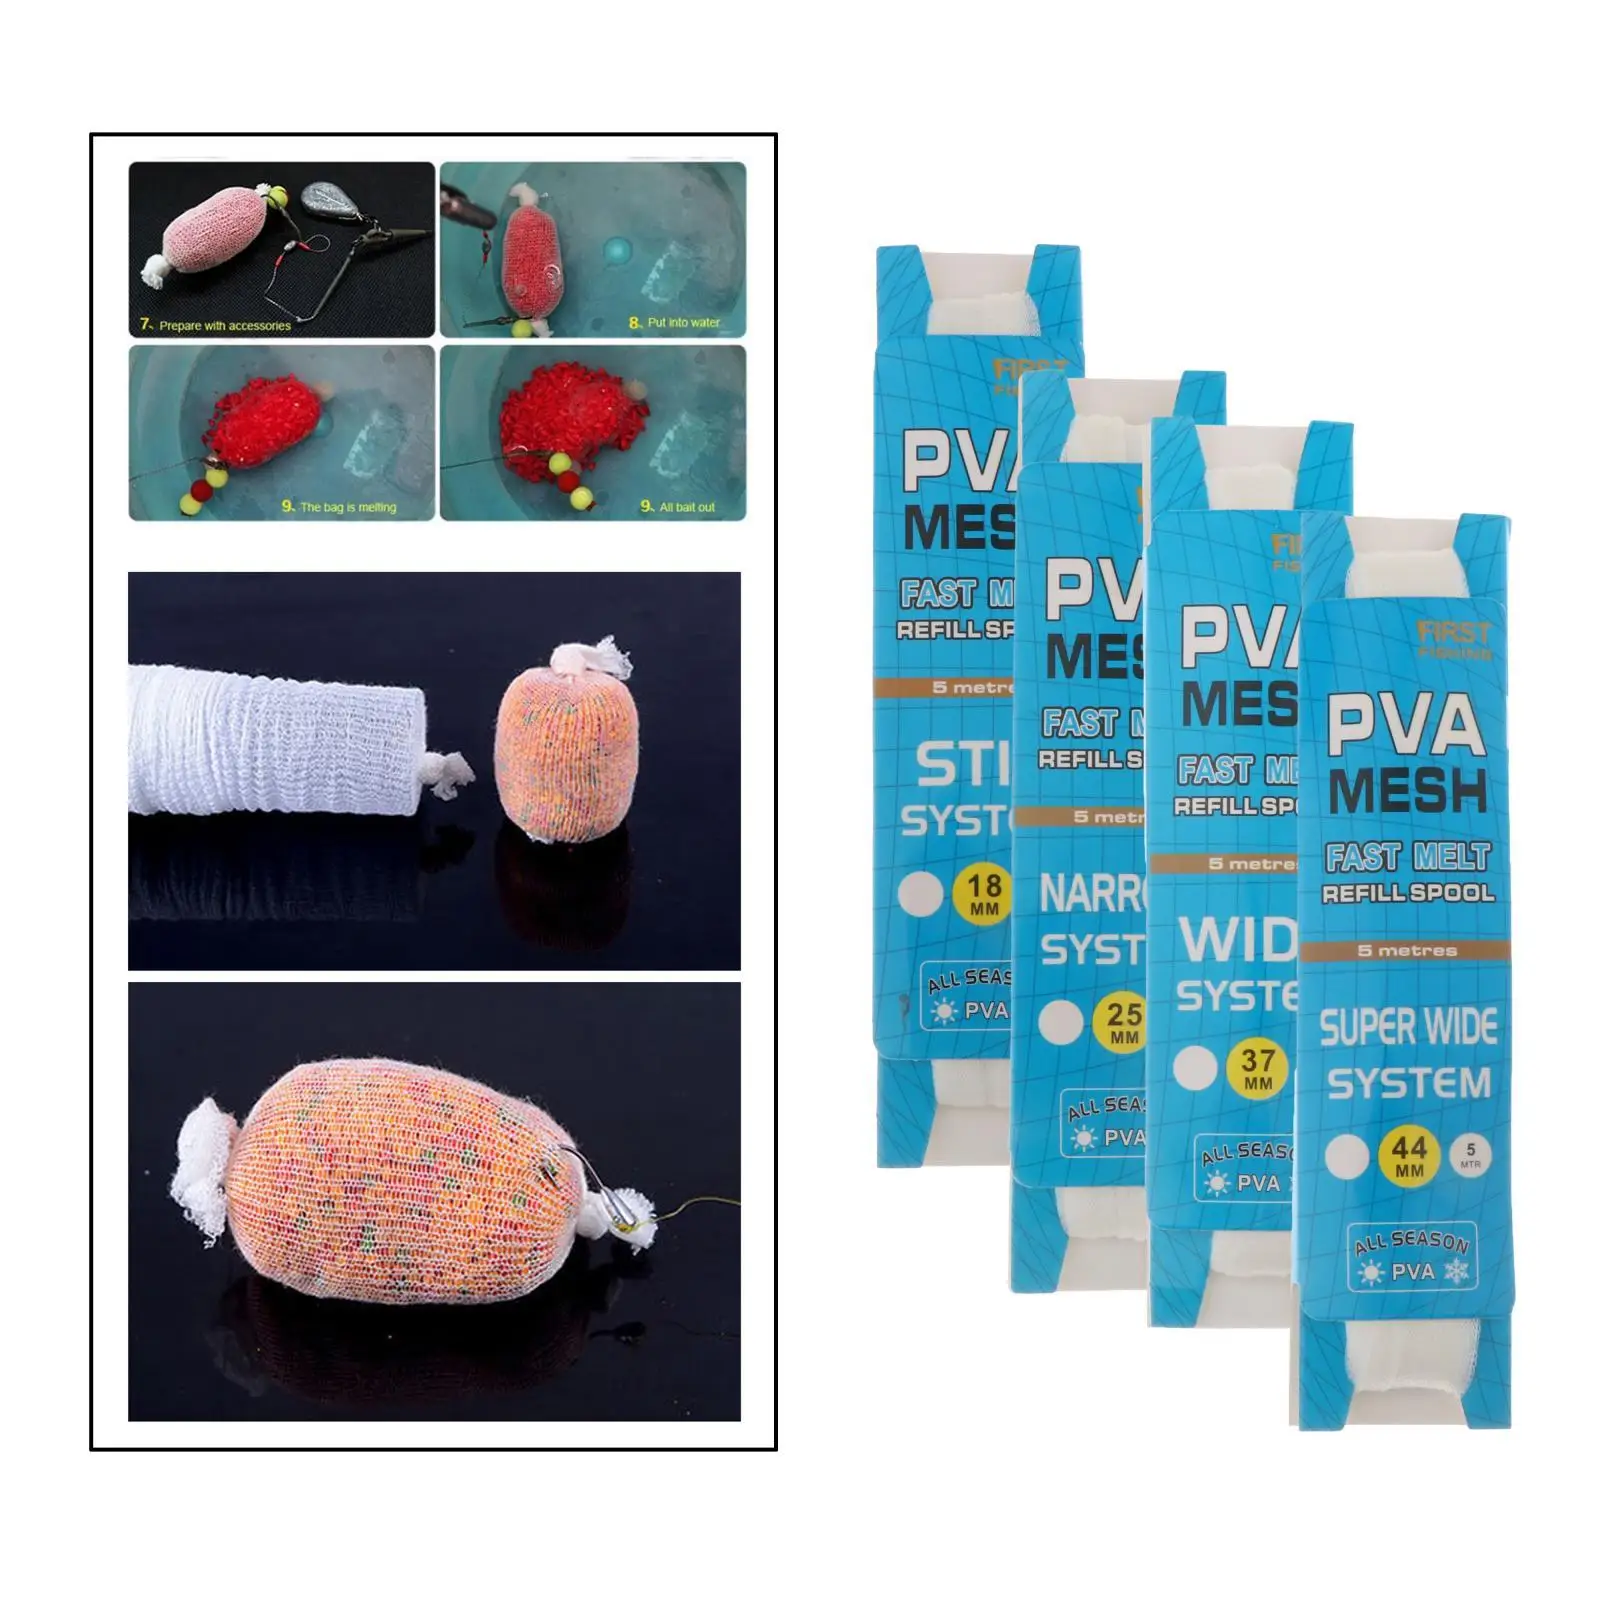 PVA Water-Soluble Fishing Bait Net Refill Stocking Mesh Bag Accessories